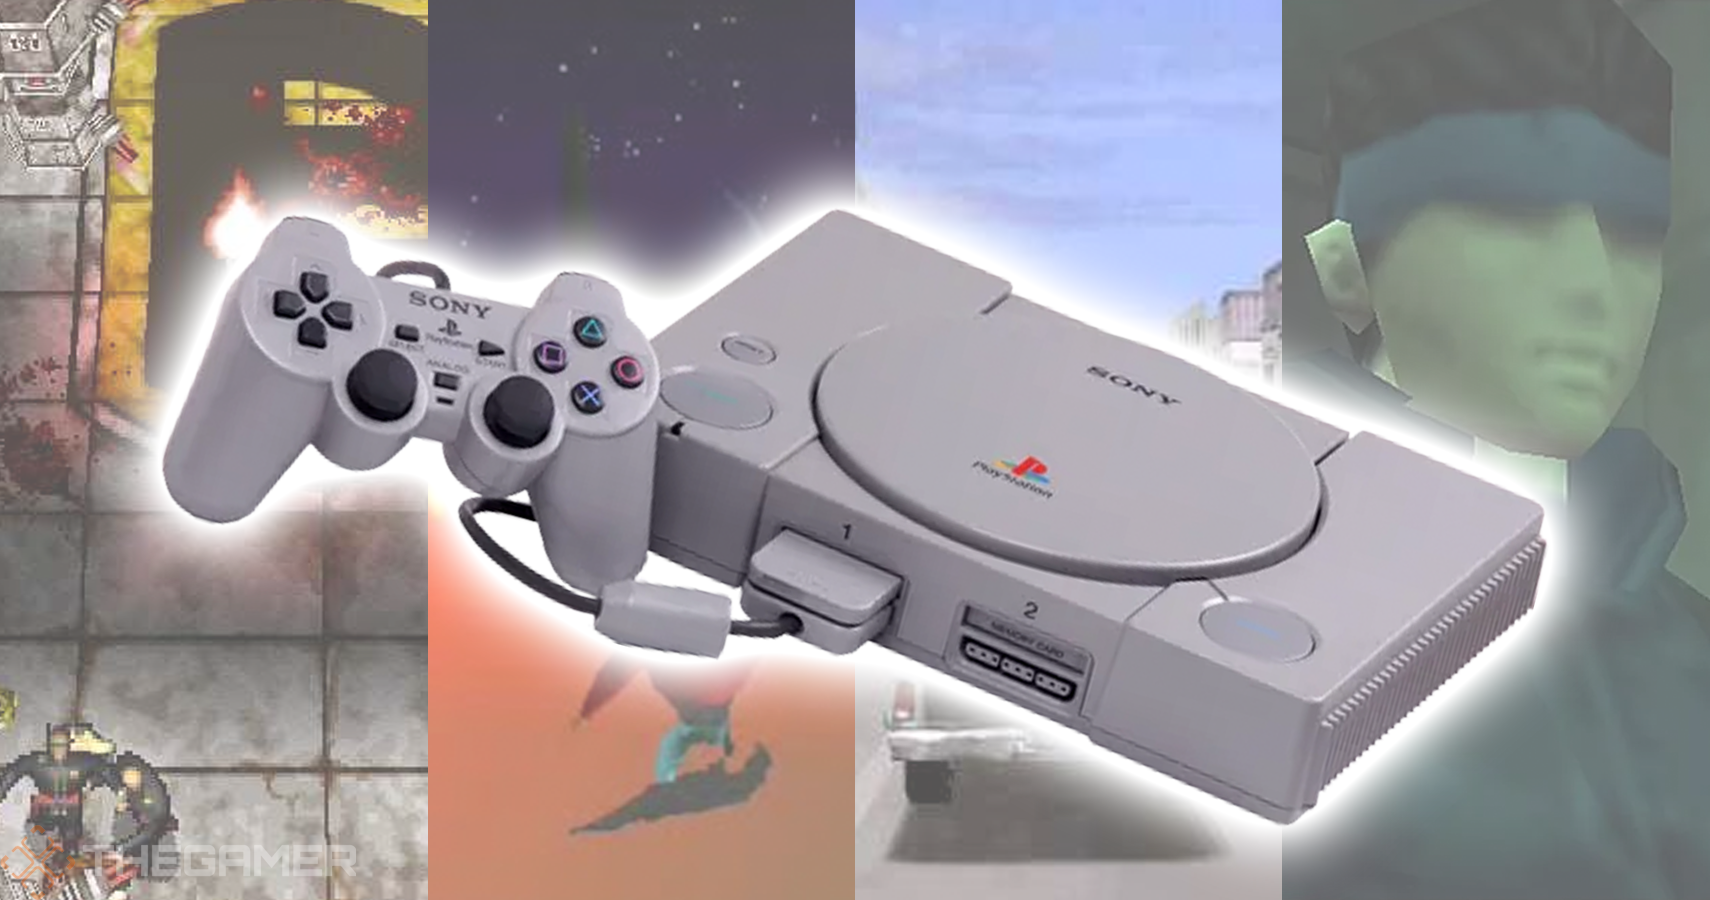 Despite My Next-Gen Console, I’m Unapologetically All About PS1-Style Games Right Now